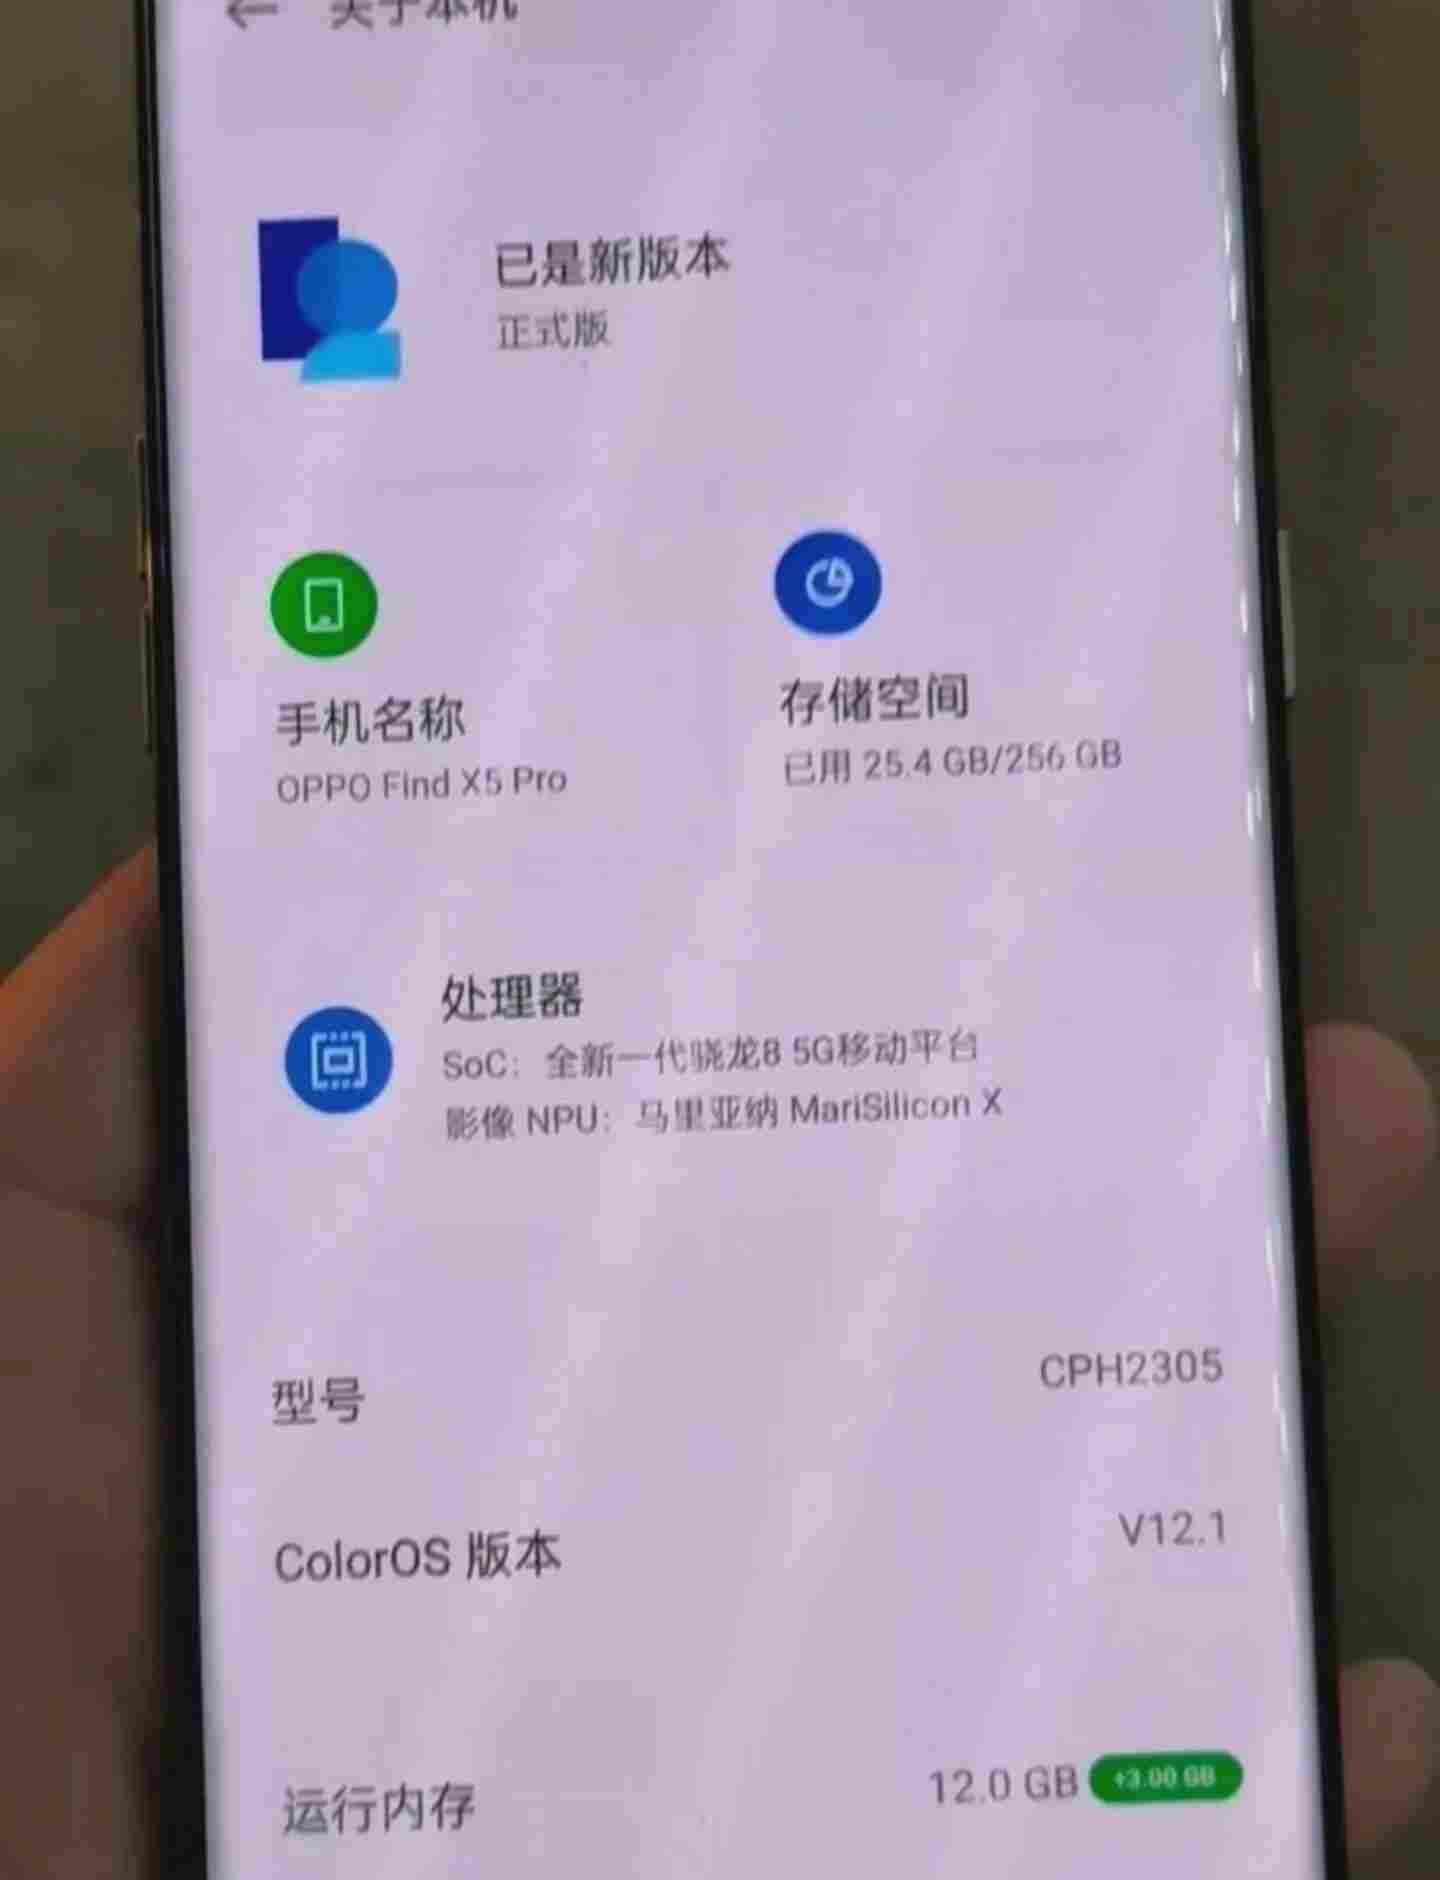 oppo find x5 leaked images